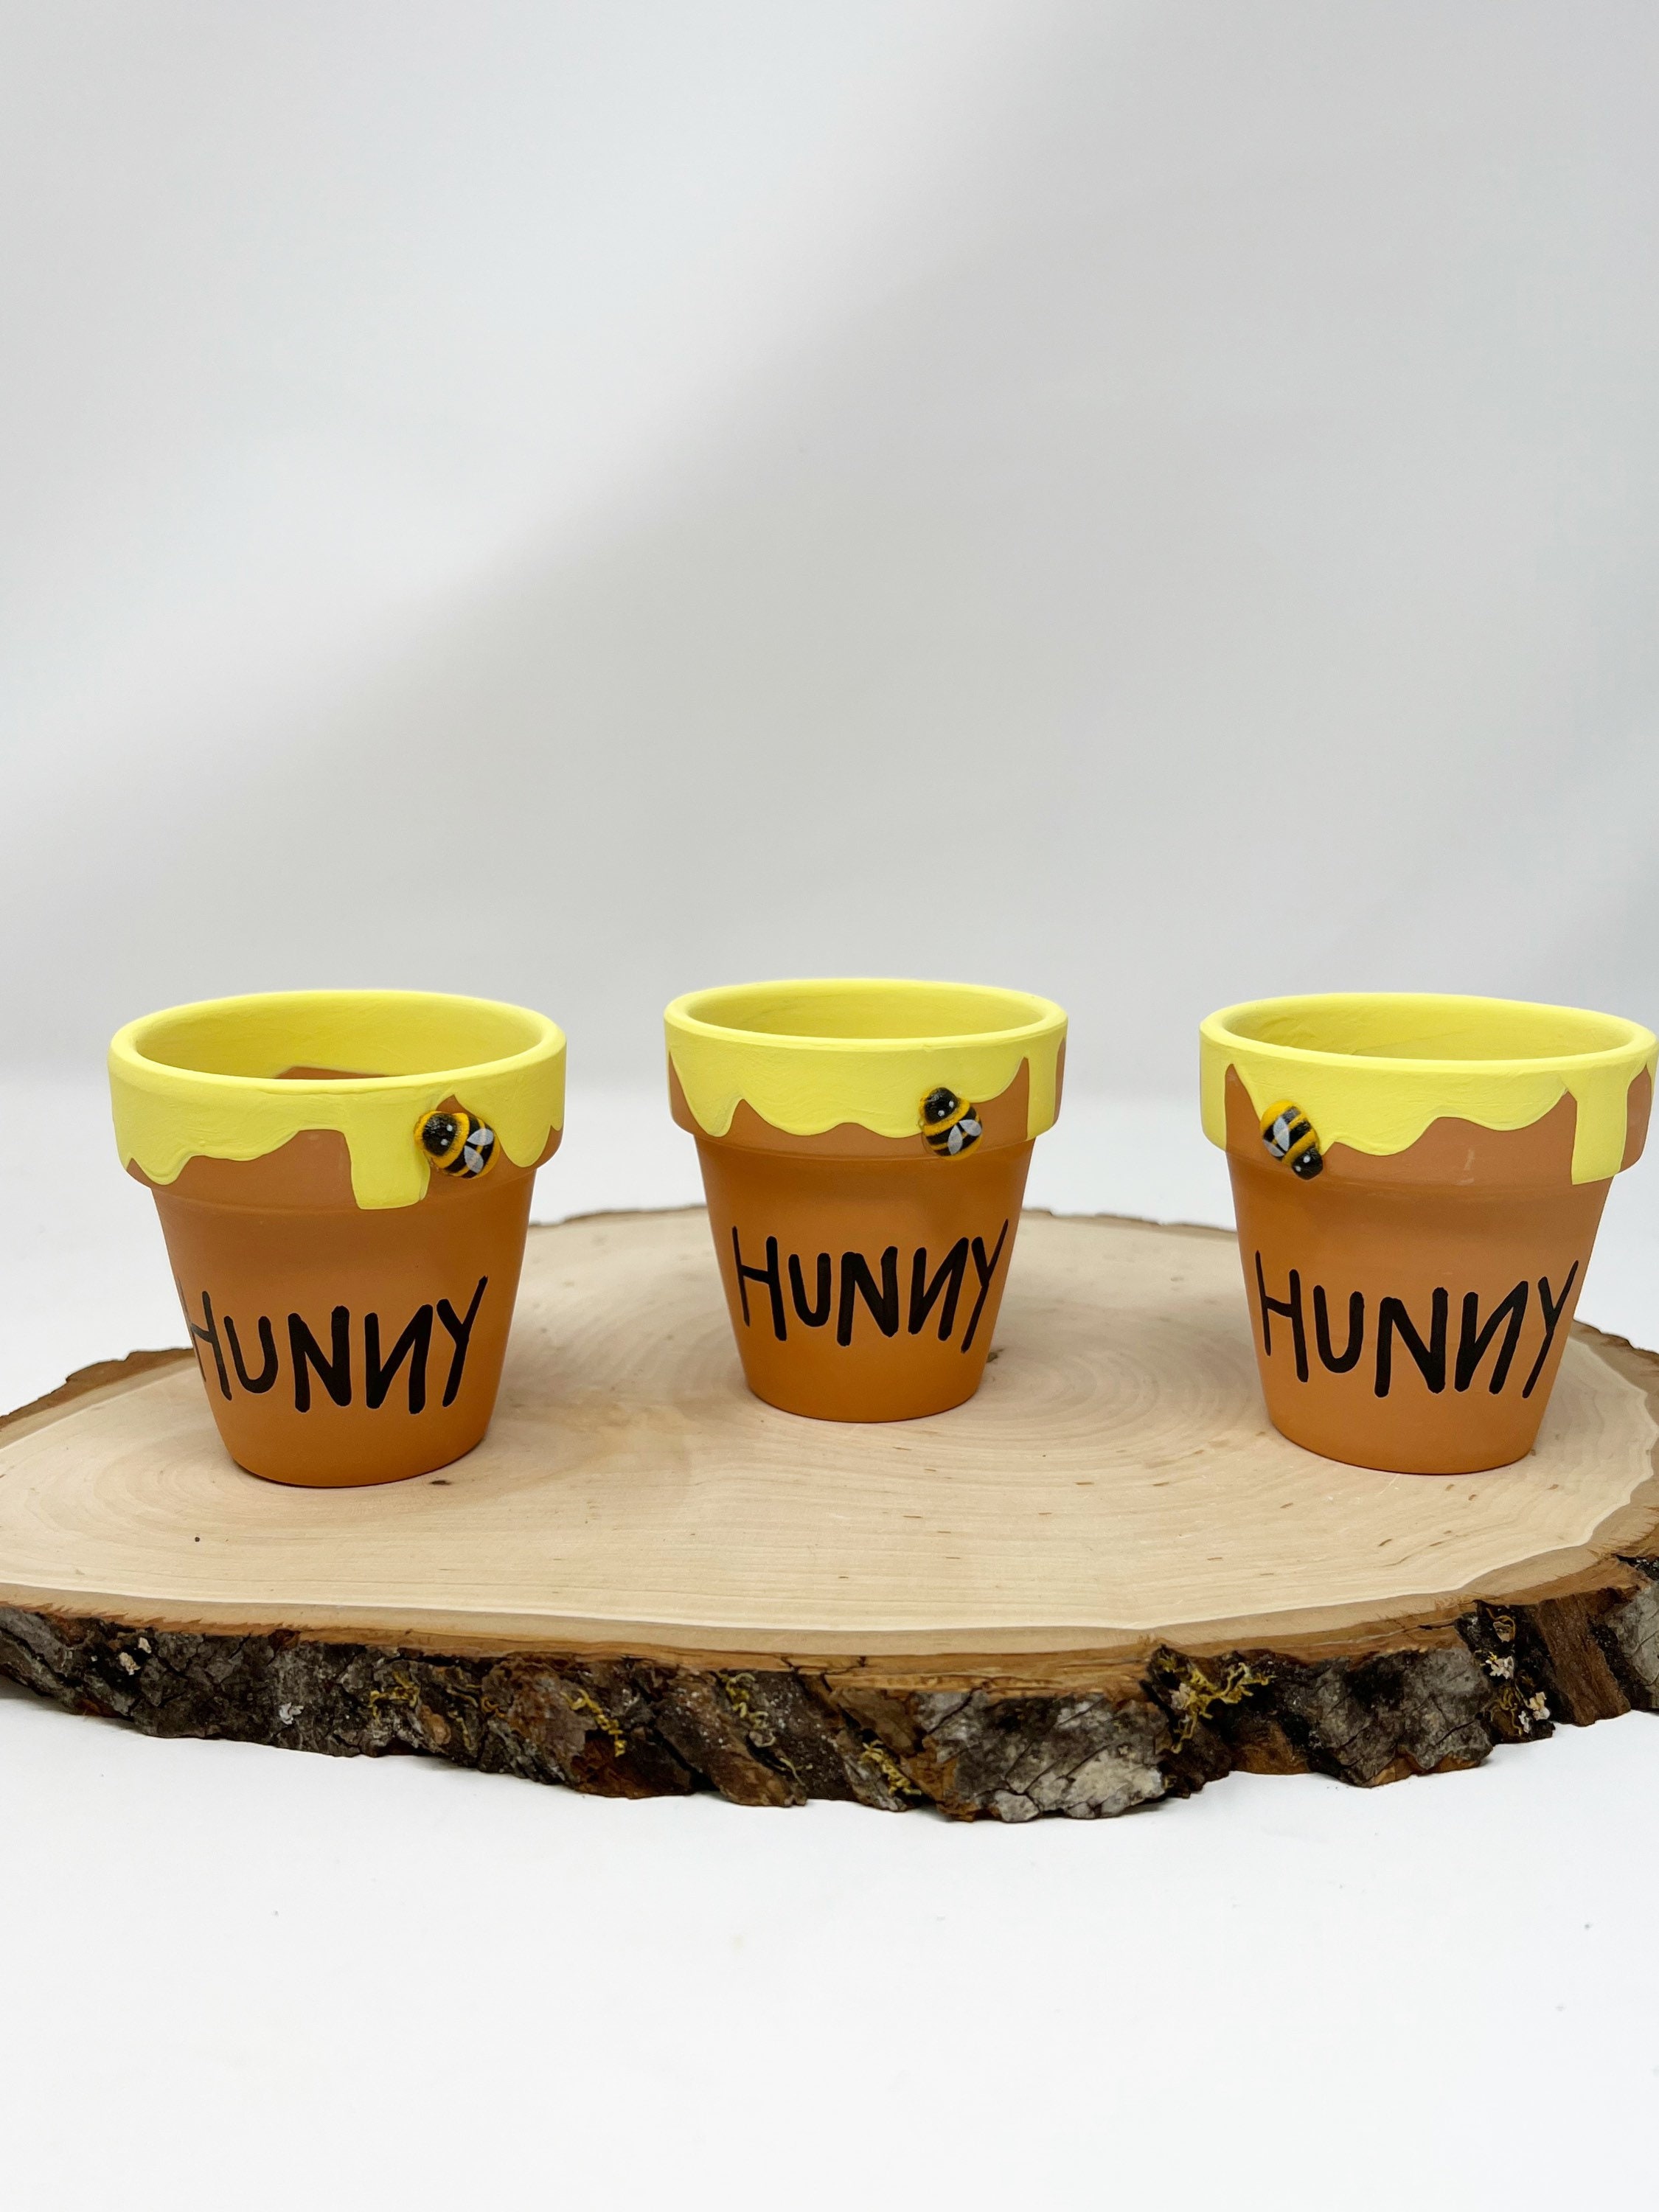 Winnie the Pooh Hunny Pot,hunny Pot Decor,hunny Pot,bumble Bee Baby  Shower,mommy to Bee Baby Shower Centerpiece,baby Bee 